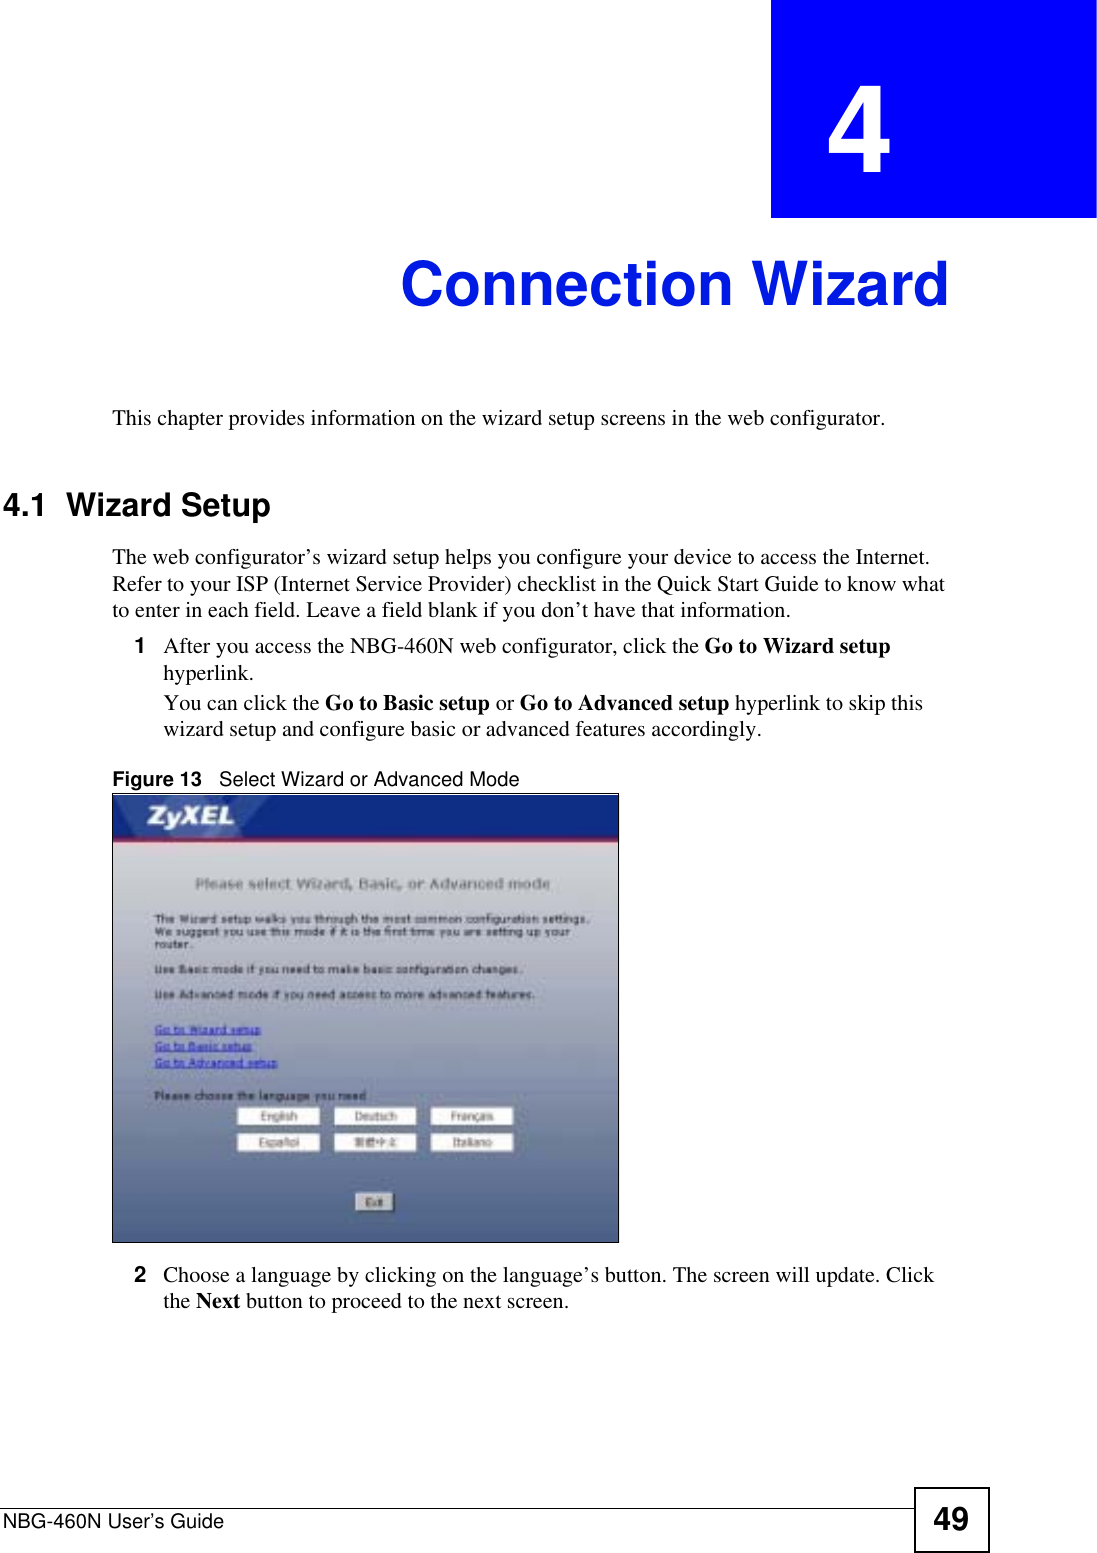 NBG-460N User’s Guide 49CHAPTER  4 Connection WizardThis chapter provides information on the wizard setup screens in the web configurator.4.1  Wizard SetupThe web configurator’s wizard setup helps you configure your device to access the Internet. Refer to your ISP (Internet Service Provider) checklist in the Quick Start Guide to know what to enter in each field. Leave a field blank if you don’t have that information.1After you access the NBG-460N web configurator, click the Go to Wizard setuphyperlink.You can click the Go to Basic setup or Go to Advanced setup hyperlink to skip this wizard setup and configure basic or advanced features accordingly.Figure 13   Select Wizard or Advanced Mode2Choose a language by clicking on the language’s button. The screen will update. Click the Next button to proceed to the next screen.